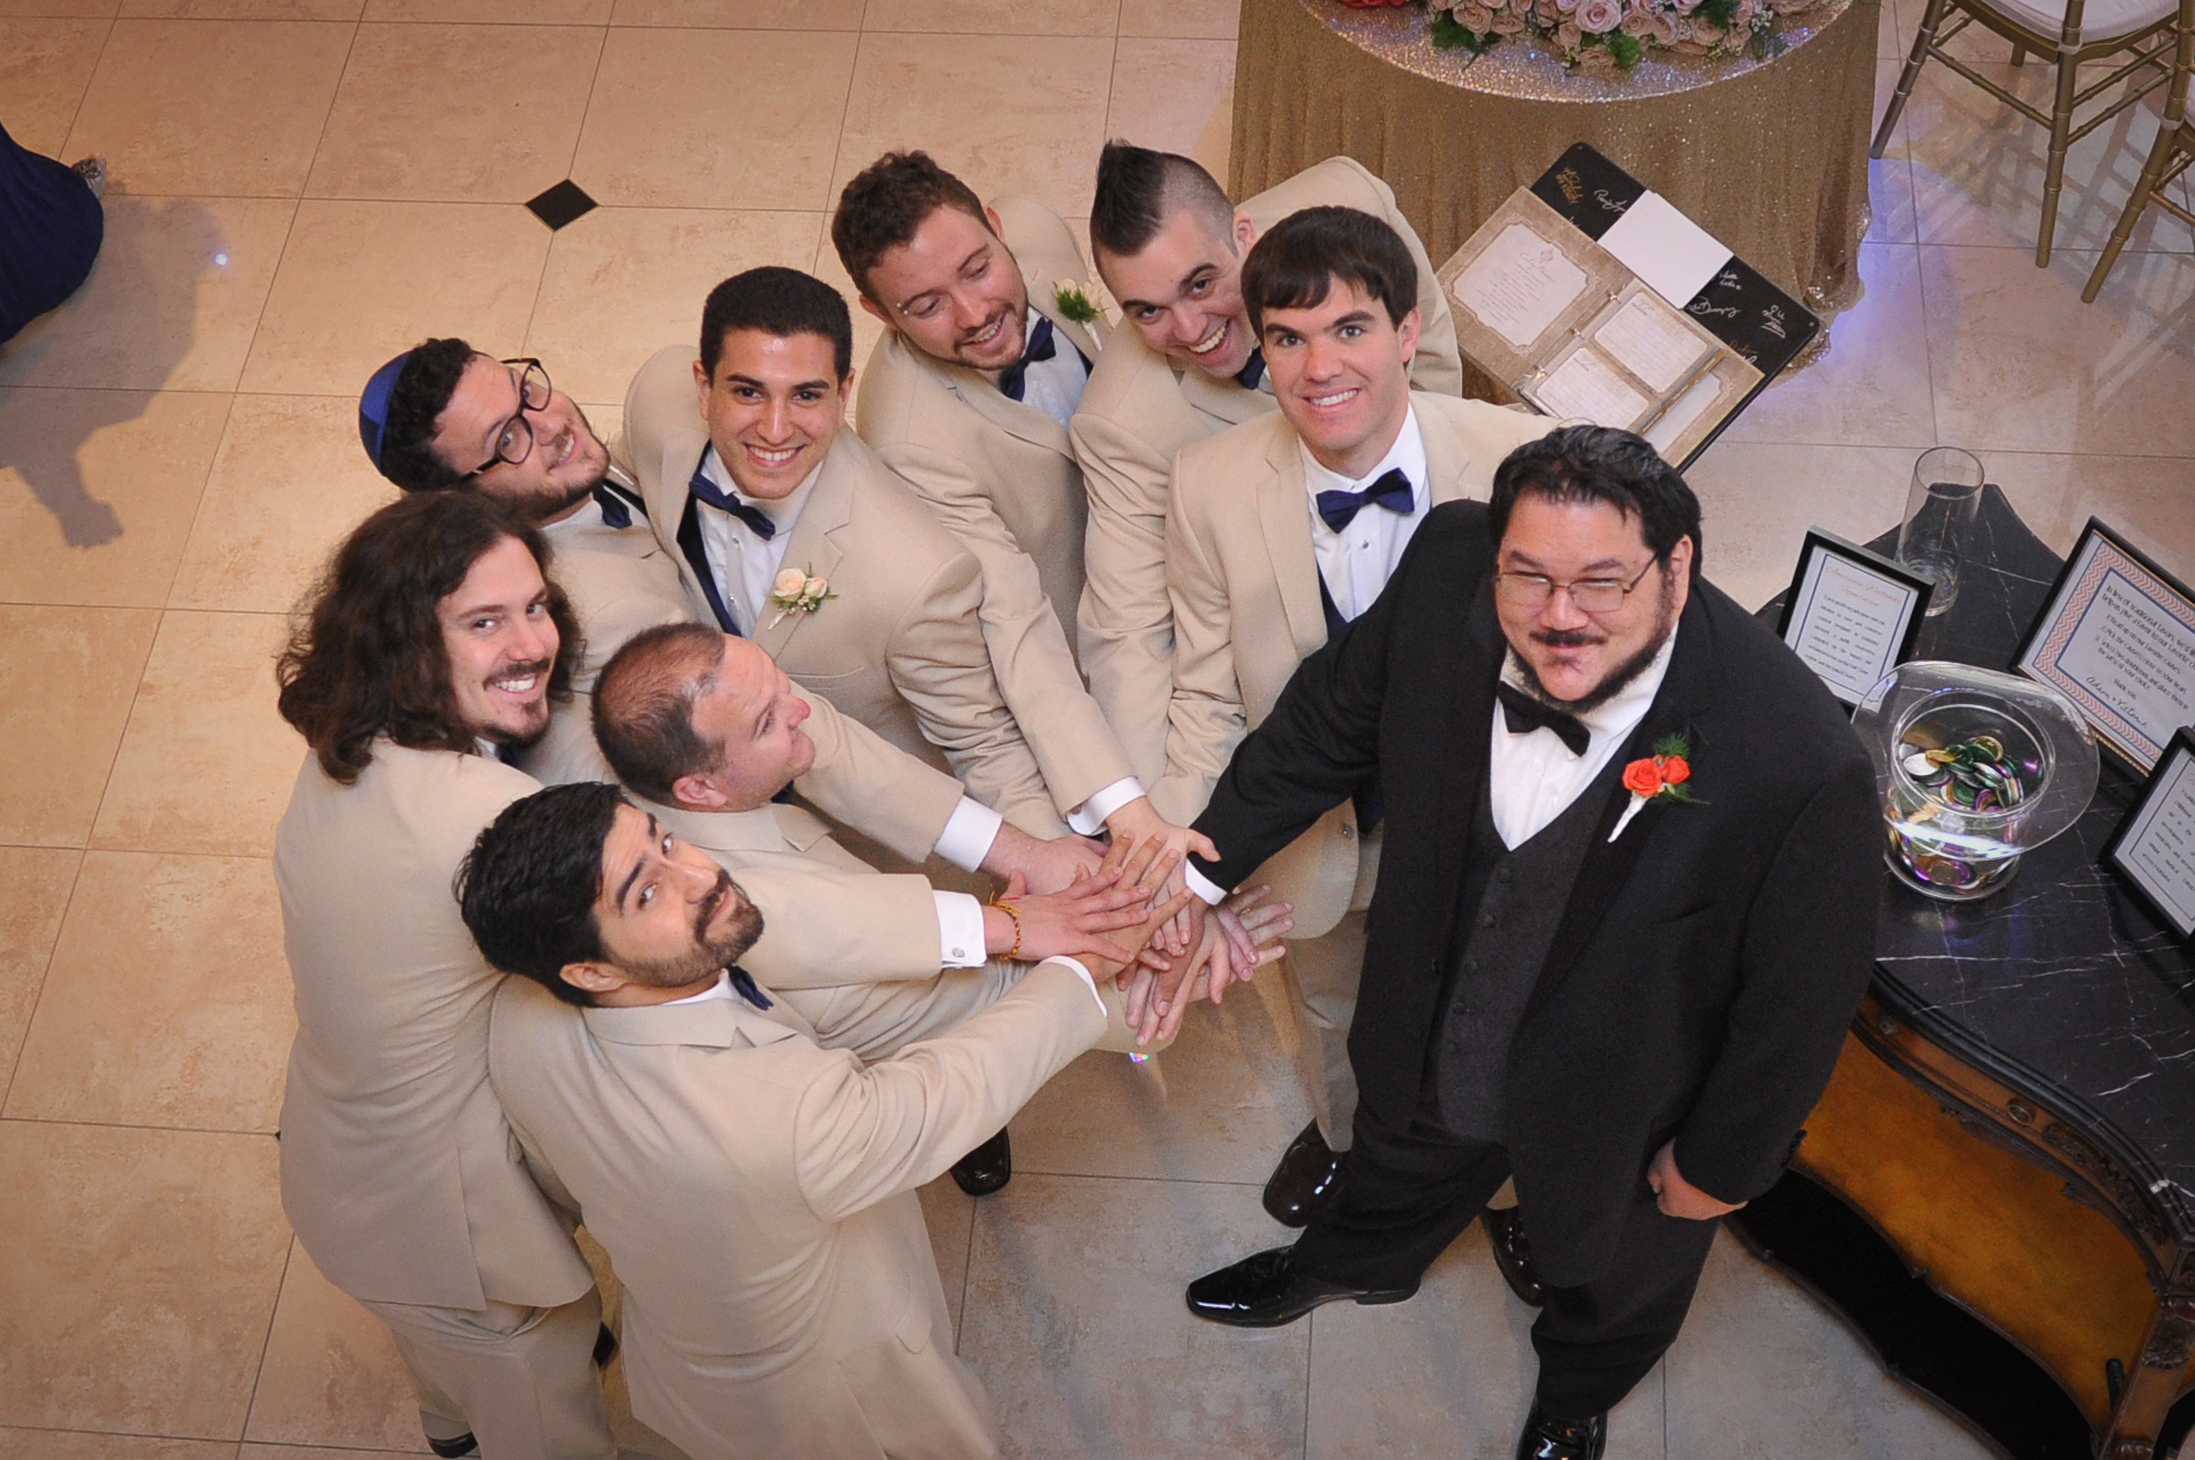 The Groom and his Groomsmen